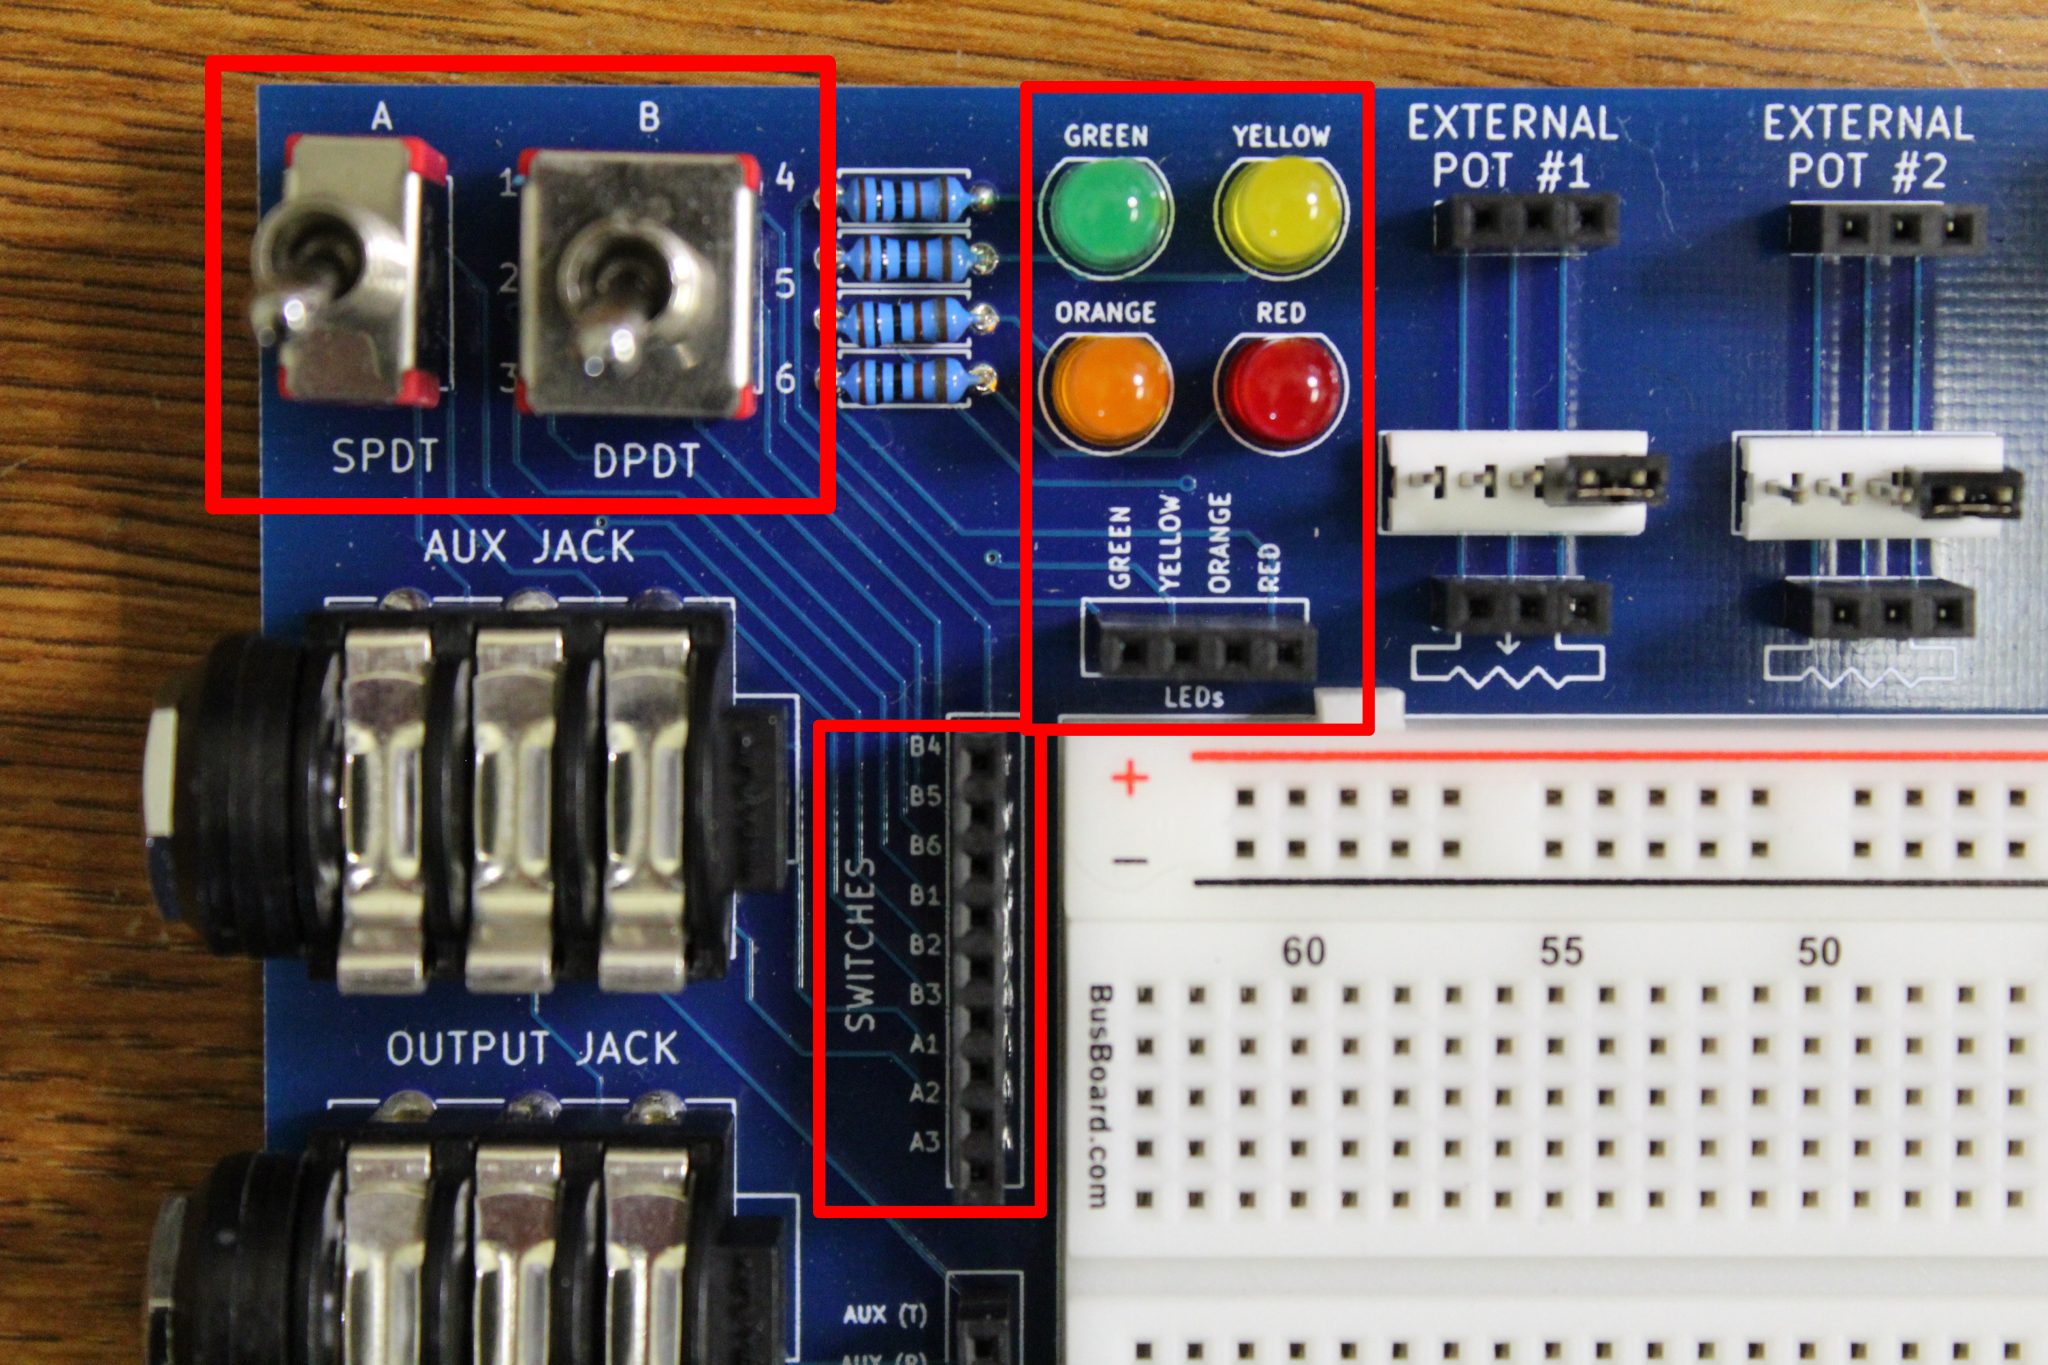 The toggle switches, LEDs, and auxiliary device header on the PROTIS 1 MINI development board.